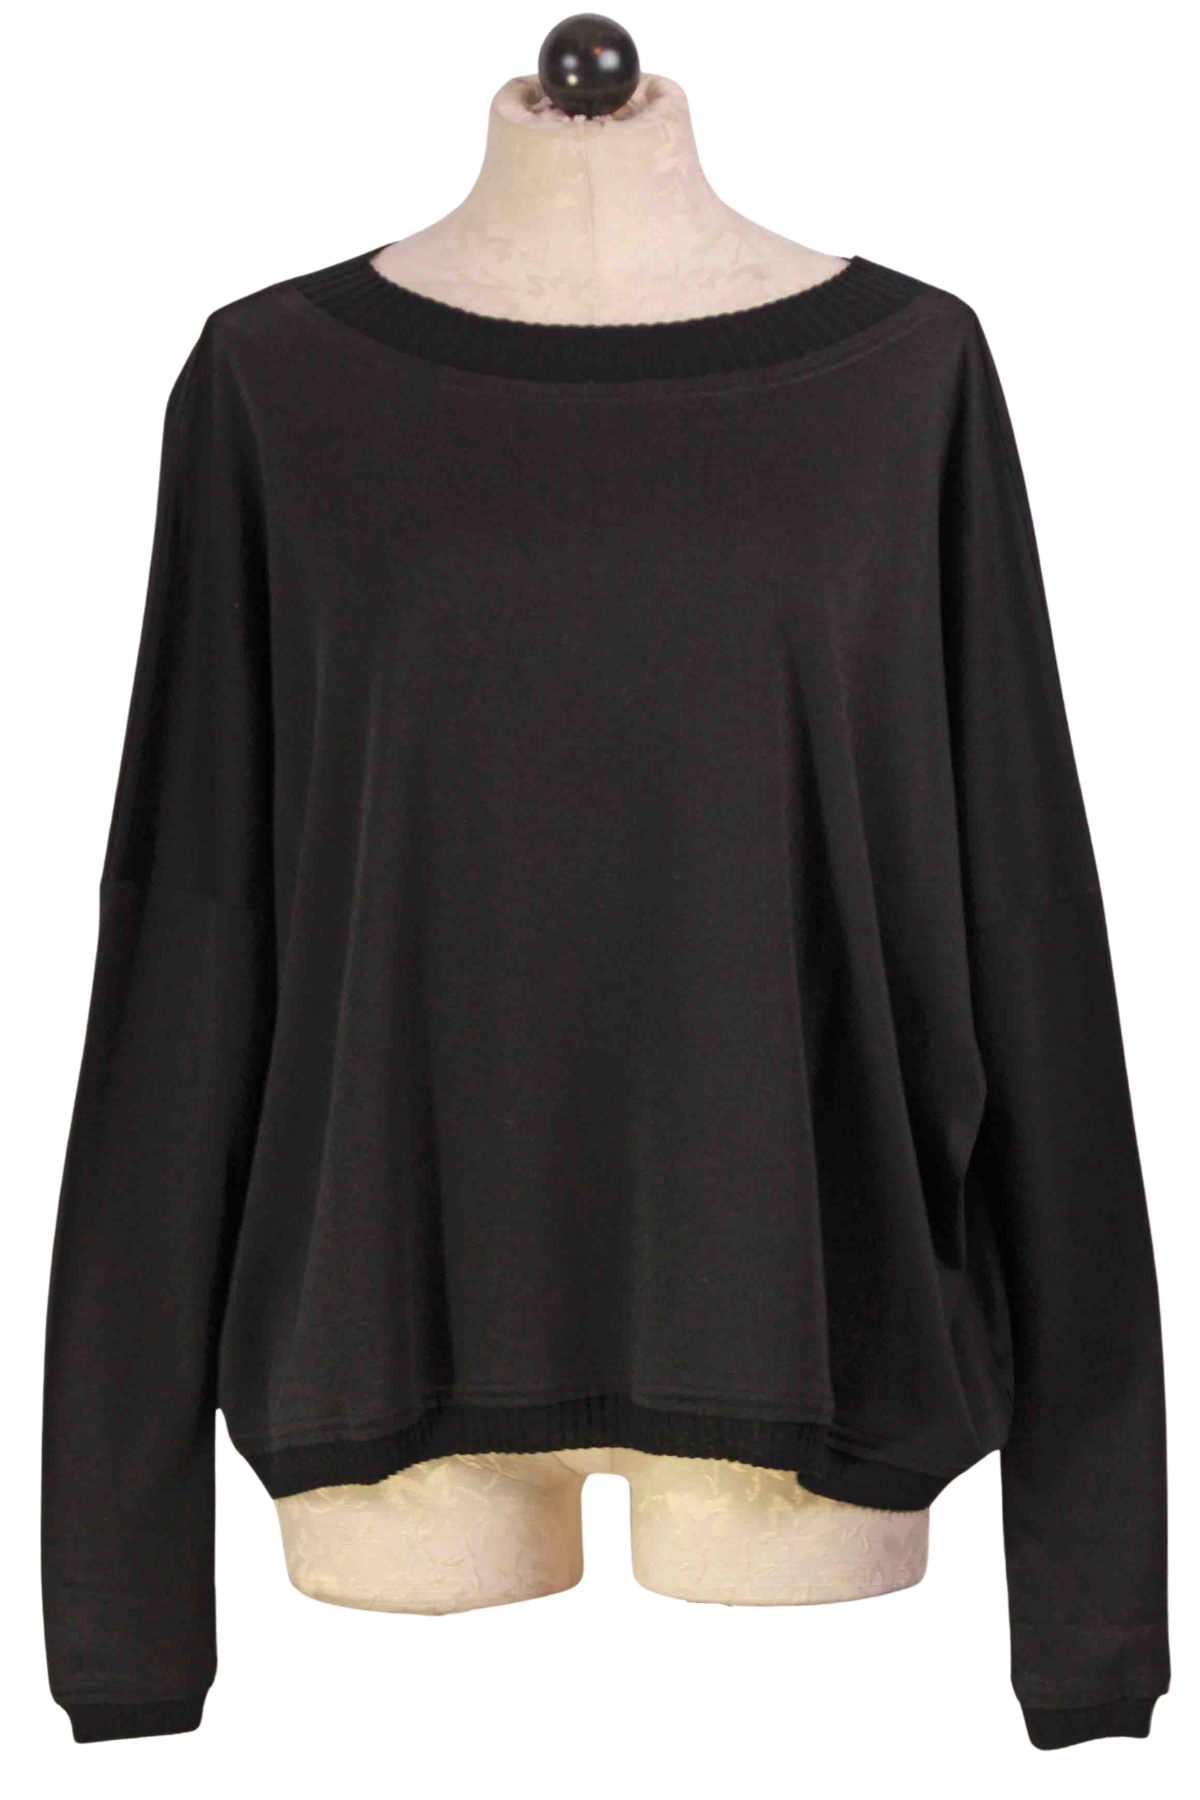 black Off the Shoulder Top by Planet